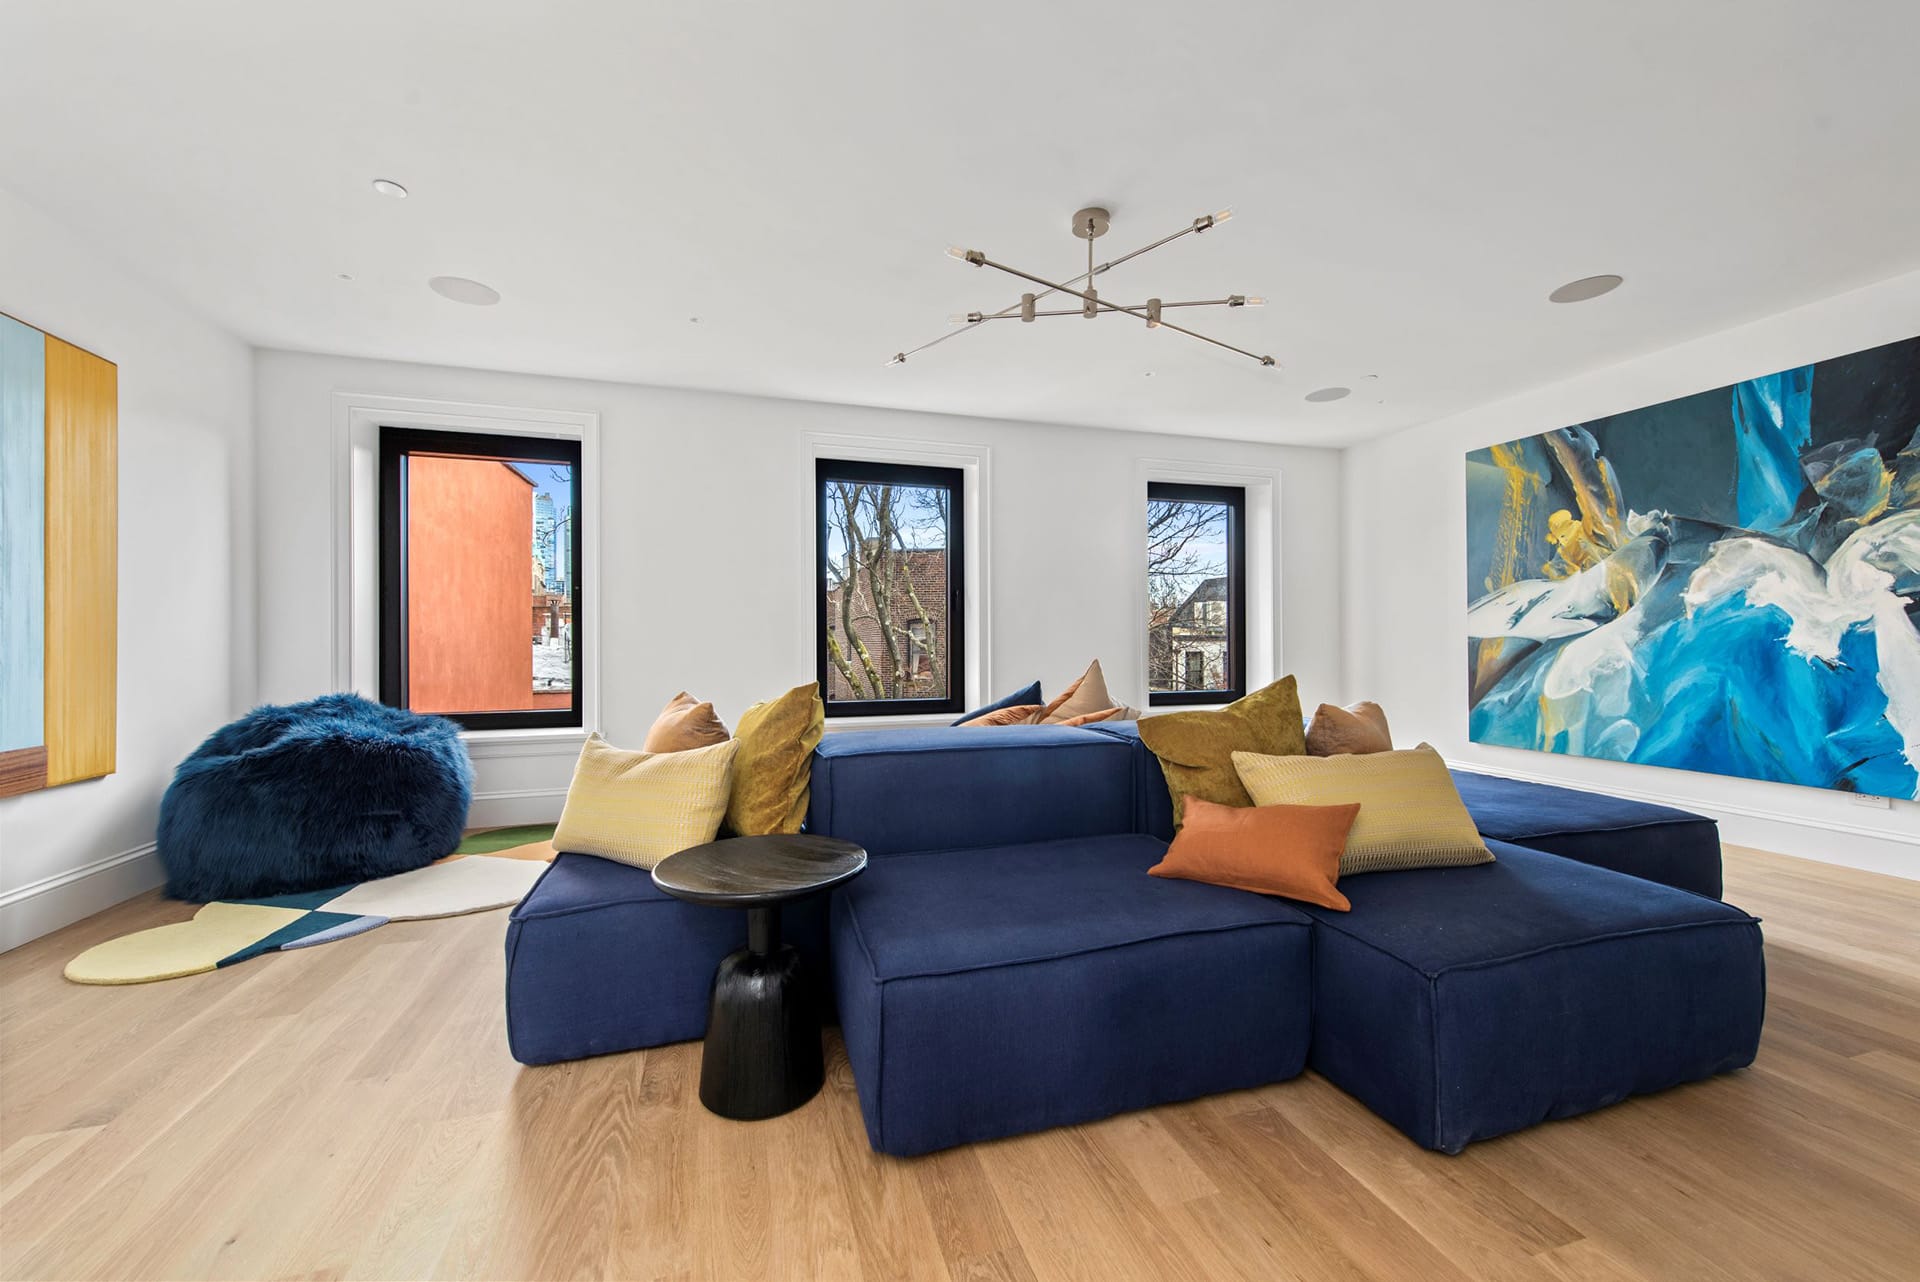 Recreation room with wood floors, three windows, and a large navy blue sectional with orange and yellow pillows.